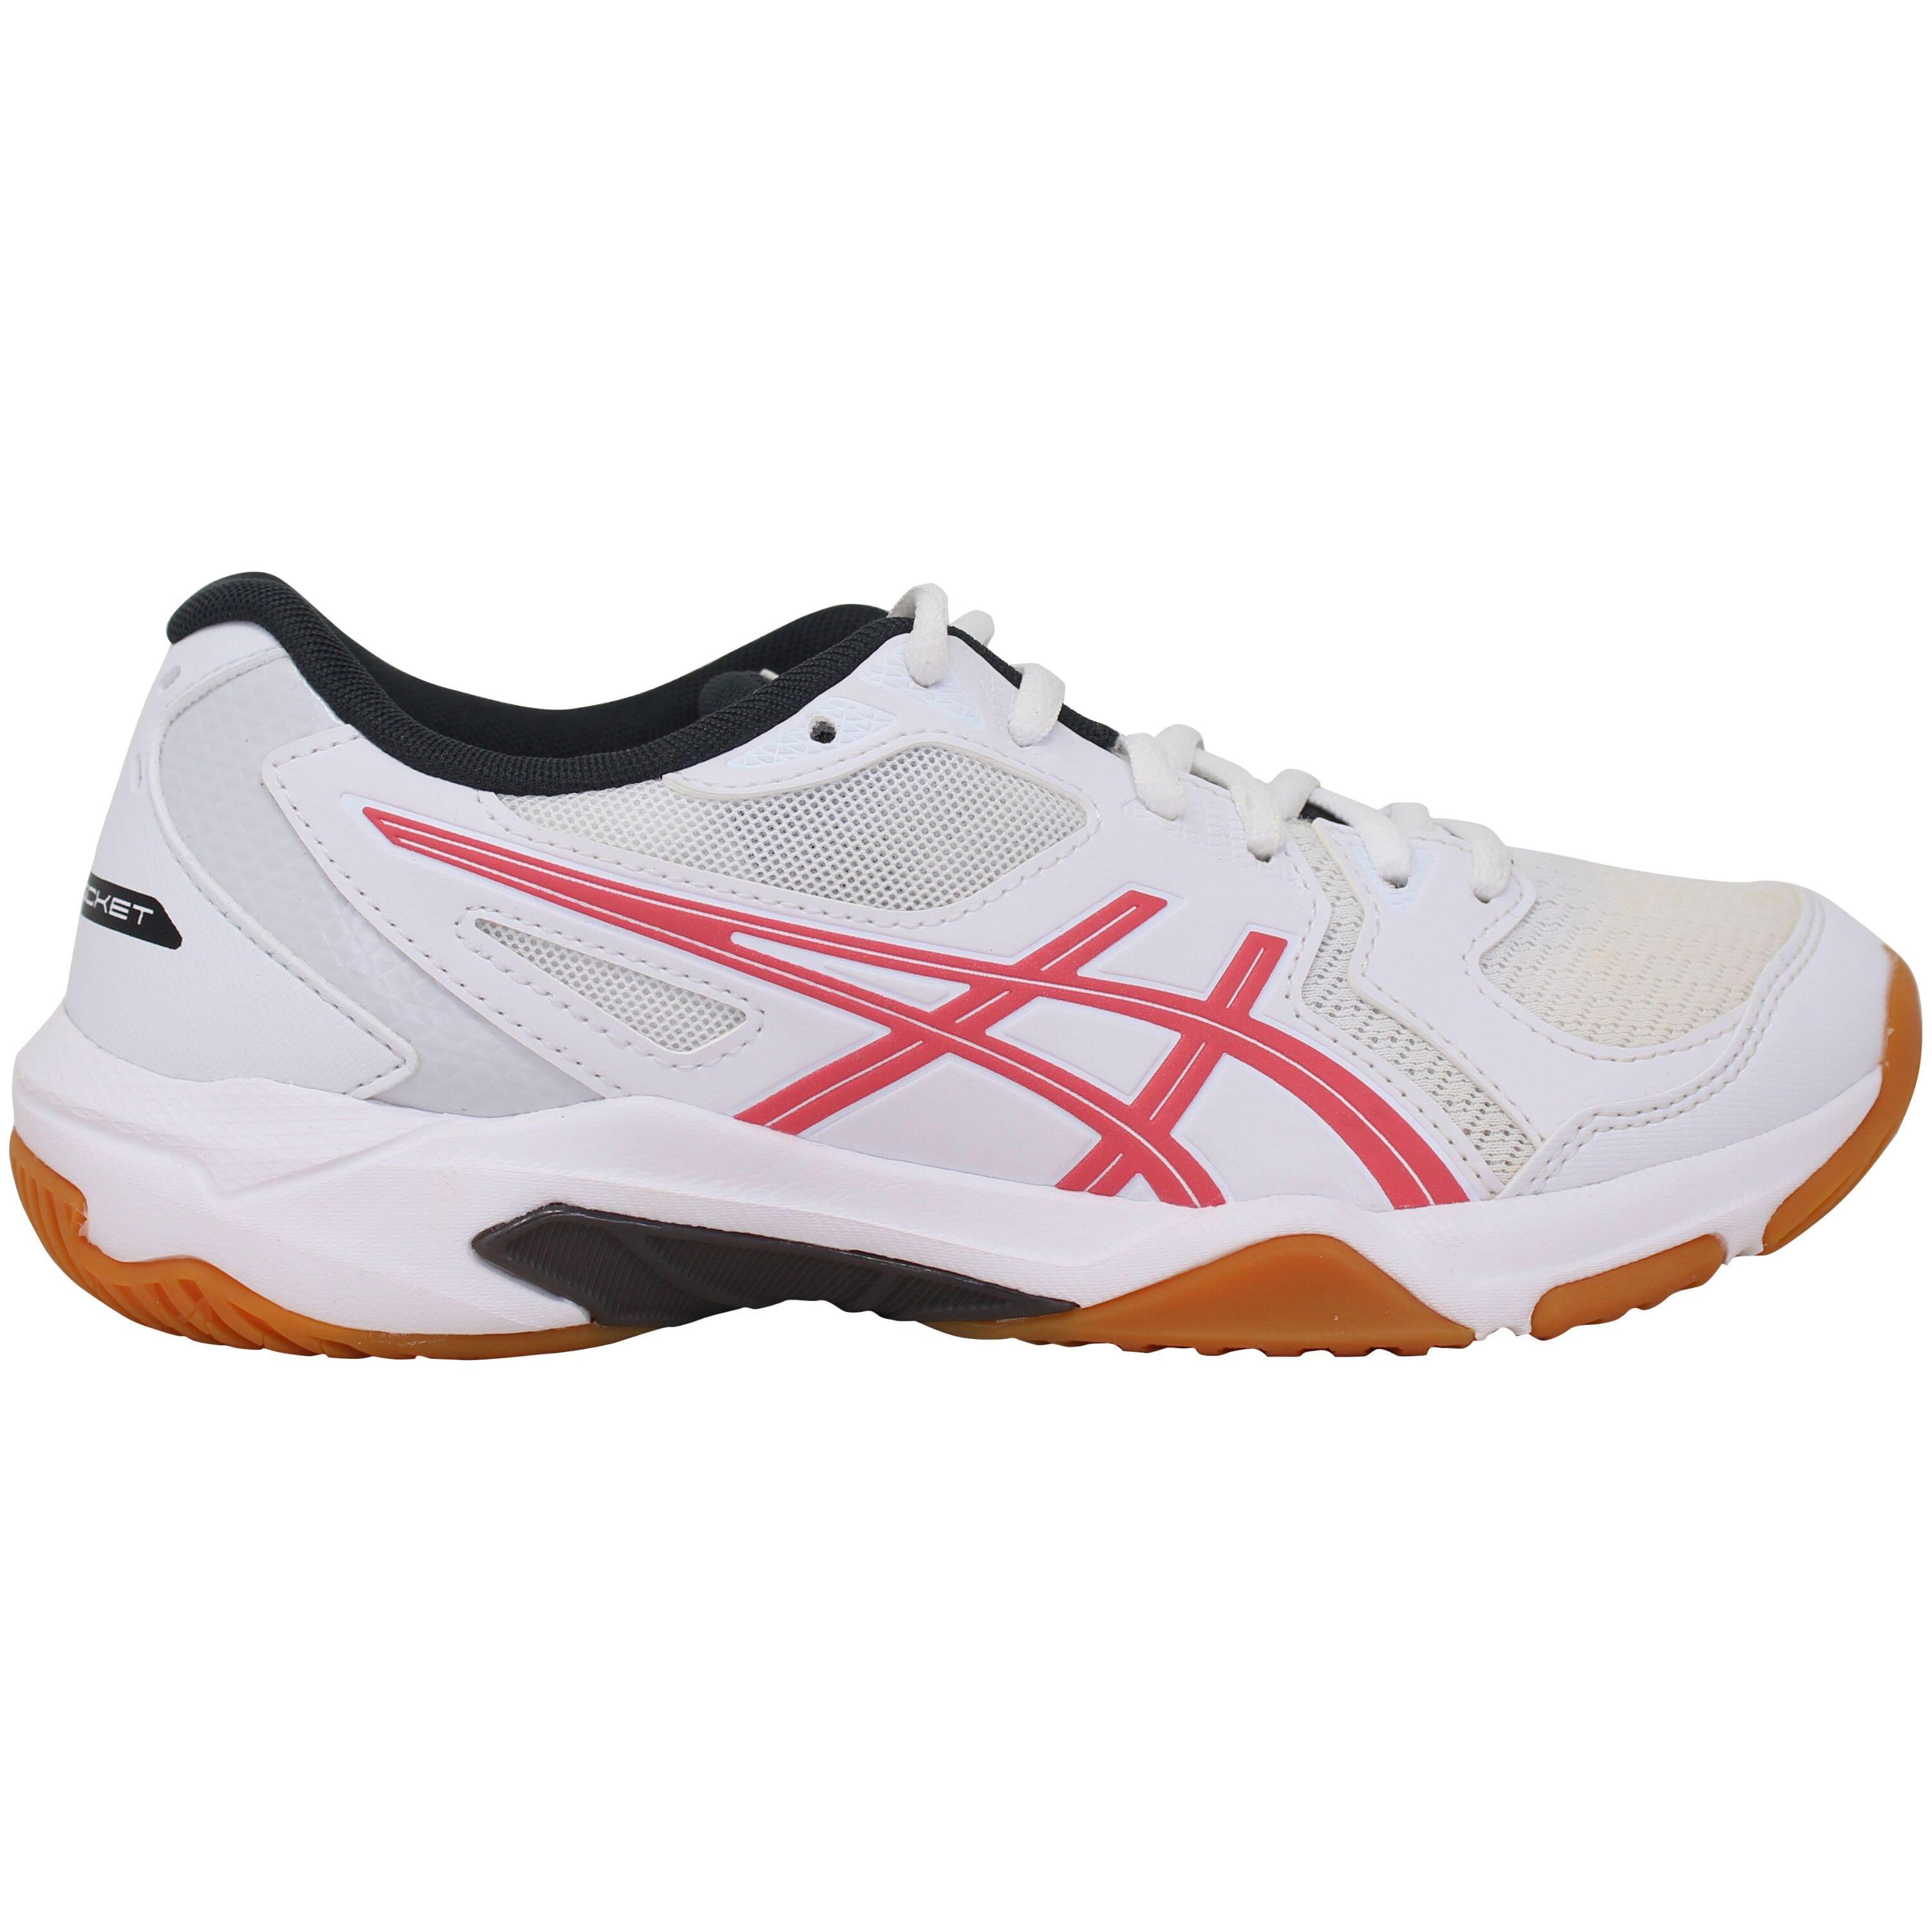 Confundir bombilla Capitán Brie Asics Gel-rocket 10 White/pink Cameo 1072a056-108 | Lyst